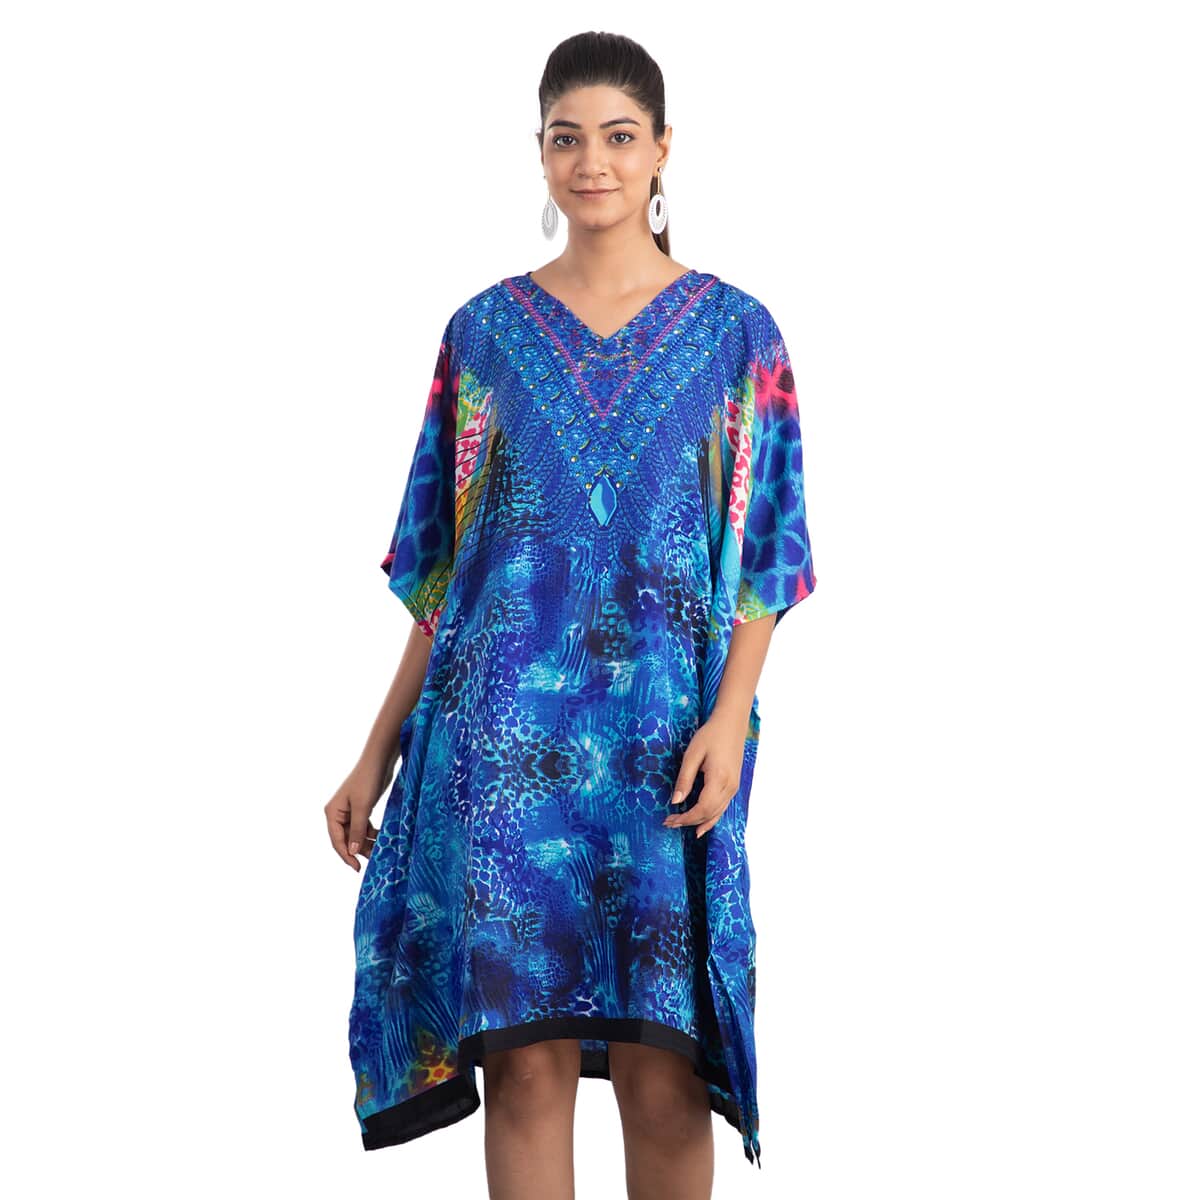 JOVIE Blue Animal Fantasy Screen Printed Mid Short Kaftan with Pockets - One Size Fits Most (36"x41") image number 0